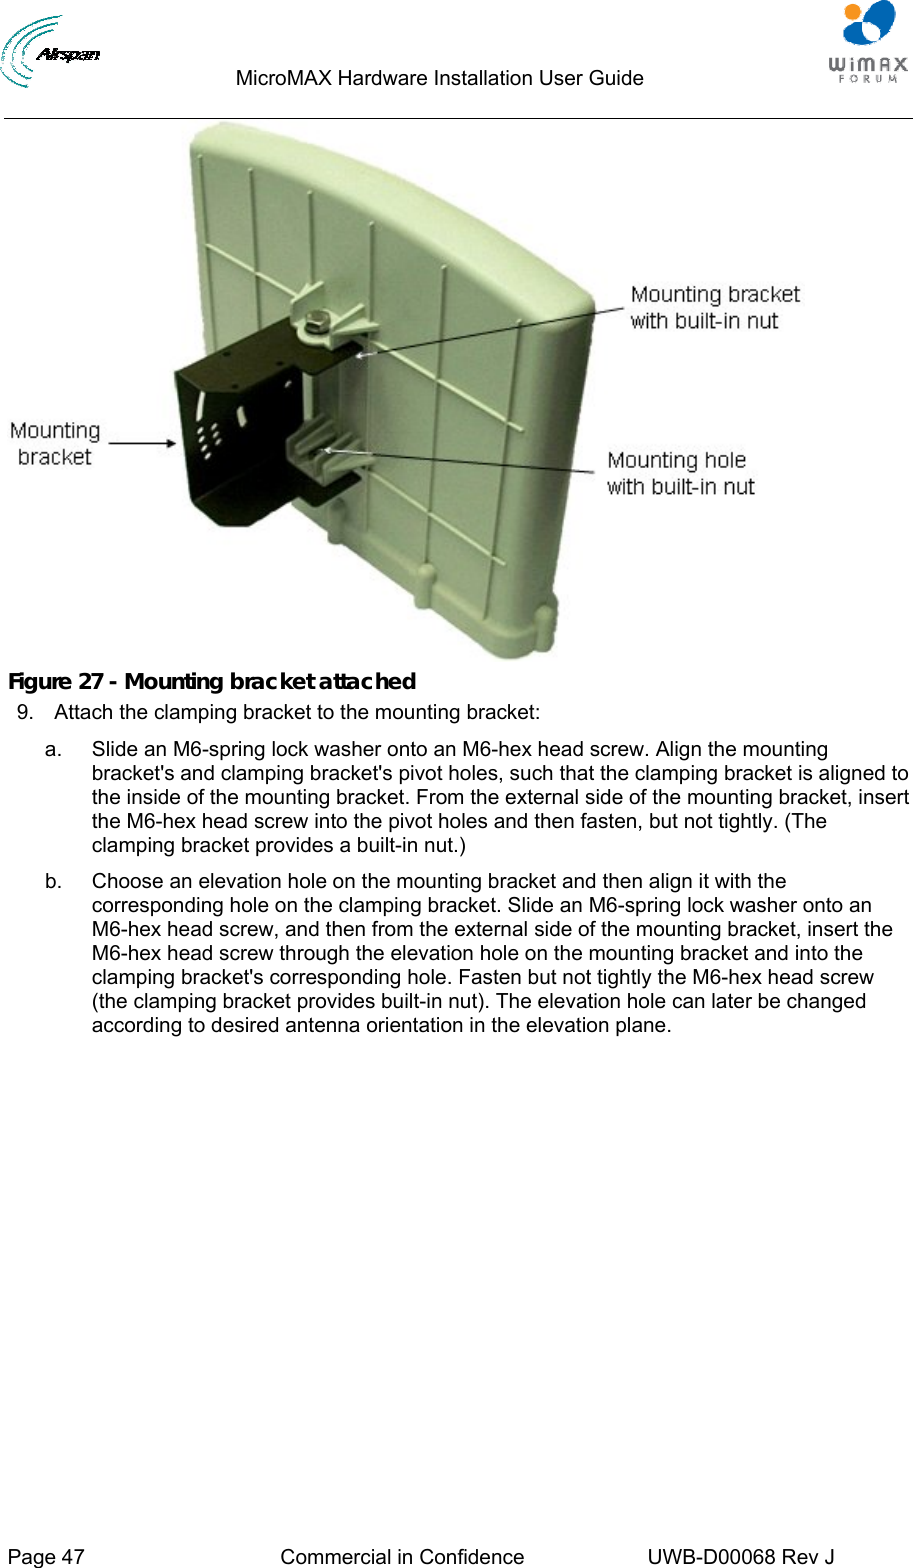                                  MicroMAX Hardware Installation User Guide     Page 47  Commercial in Confidence  UWB-D00068 Rev J    Figure 27 - Mounting bracket attached 9.  Attach the clamping bracket to the mounting bracket: a.  Slide an M6-spring lock washer onto an M6-hex head screw. Align the mounting bracket&apos;s and clamping bracket&apos;s pivot holes, such that the clamping bracket is aligned to the inside of the mounting bracket. From the external side of the mounting bracket, insert the M6-hex head screw into the pivot holes and then fasten, but not tightly. (The clamping bracket provides a built-in nut.) b.  Choose an elevation hole on the mounting bracket and then align it with the corresponding hole on the clamping bracket. Slide an M6-spring lock washer onto an M6-hex head screw, and then from the external side of the mounting bracket, insert the M6-hex head screw through the elevation hole on the mounting bracket and into the clamping bracket&apos;s corresponding hole. Fasten but not tightly the M6-hex head screw (the clamping bracket provides built-in nut). The elevation hole can later be changed according to desired antenna orientation in the elevation plane. 